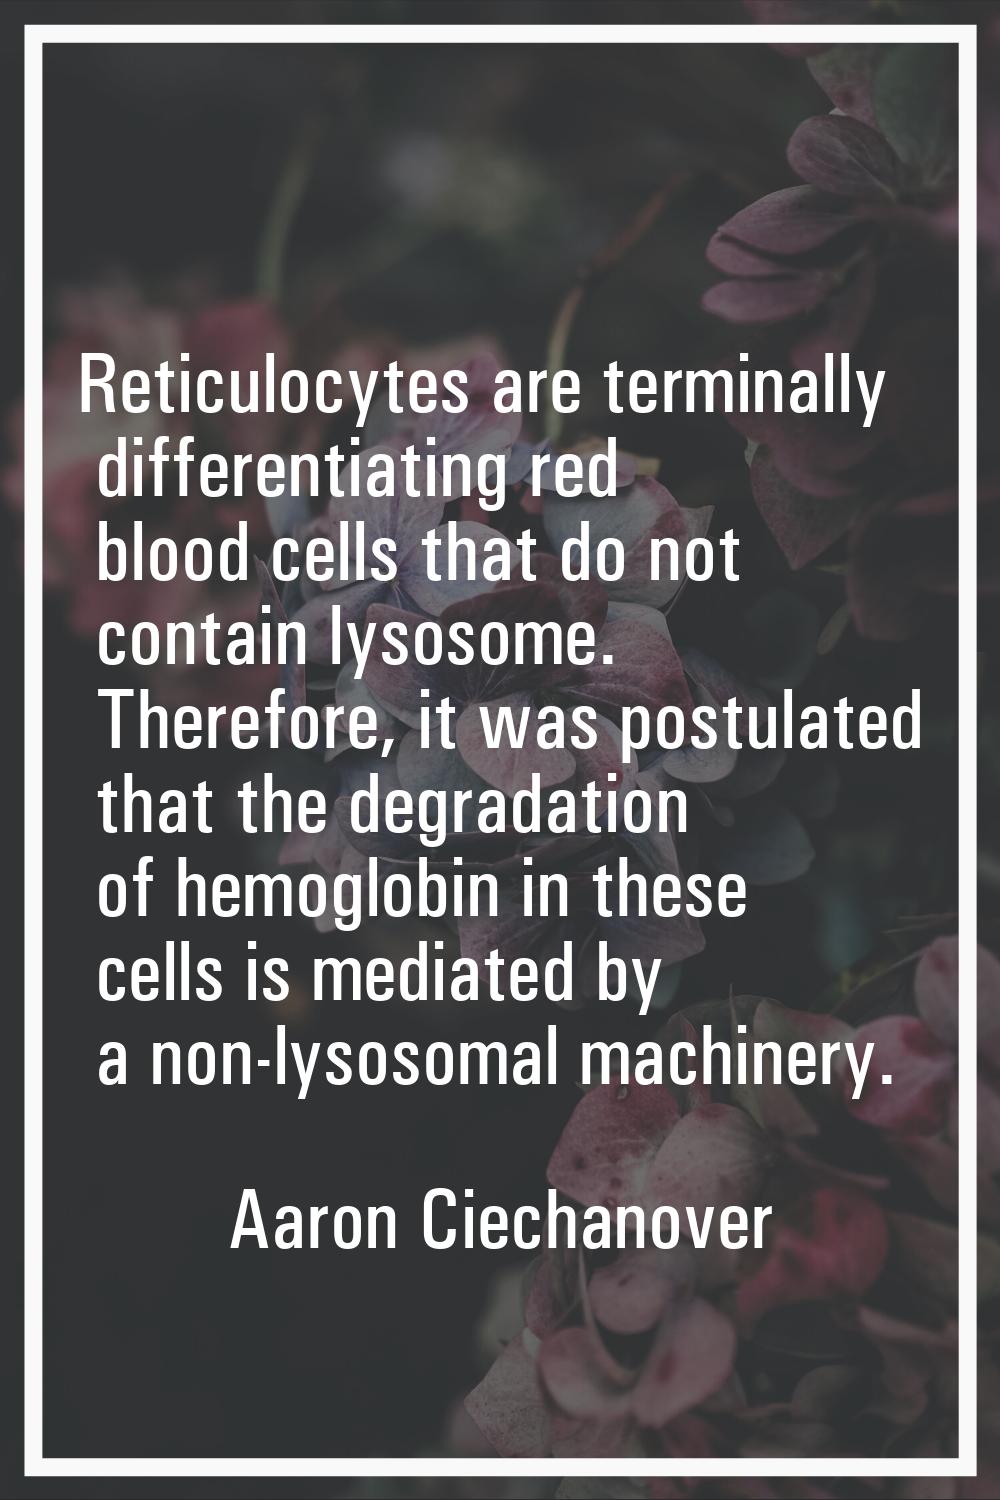 Reticulocytes are terminally differentiating red blood cells that do not contain lysosome. Therefor